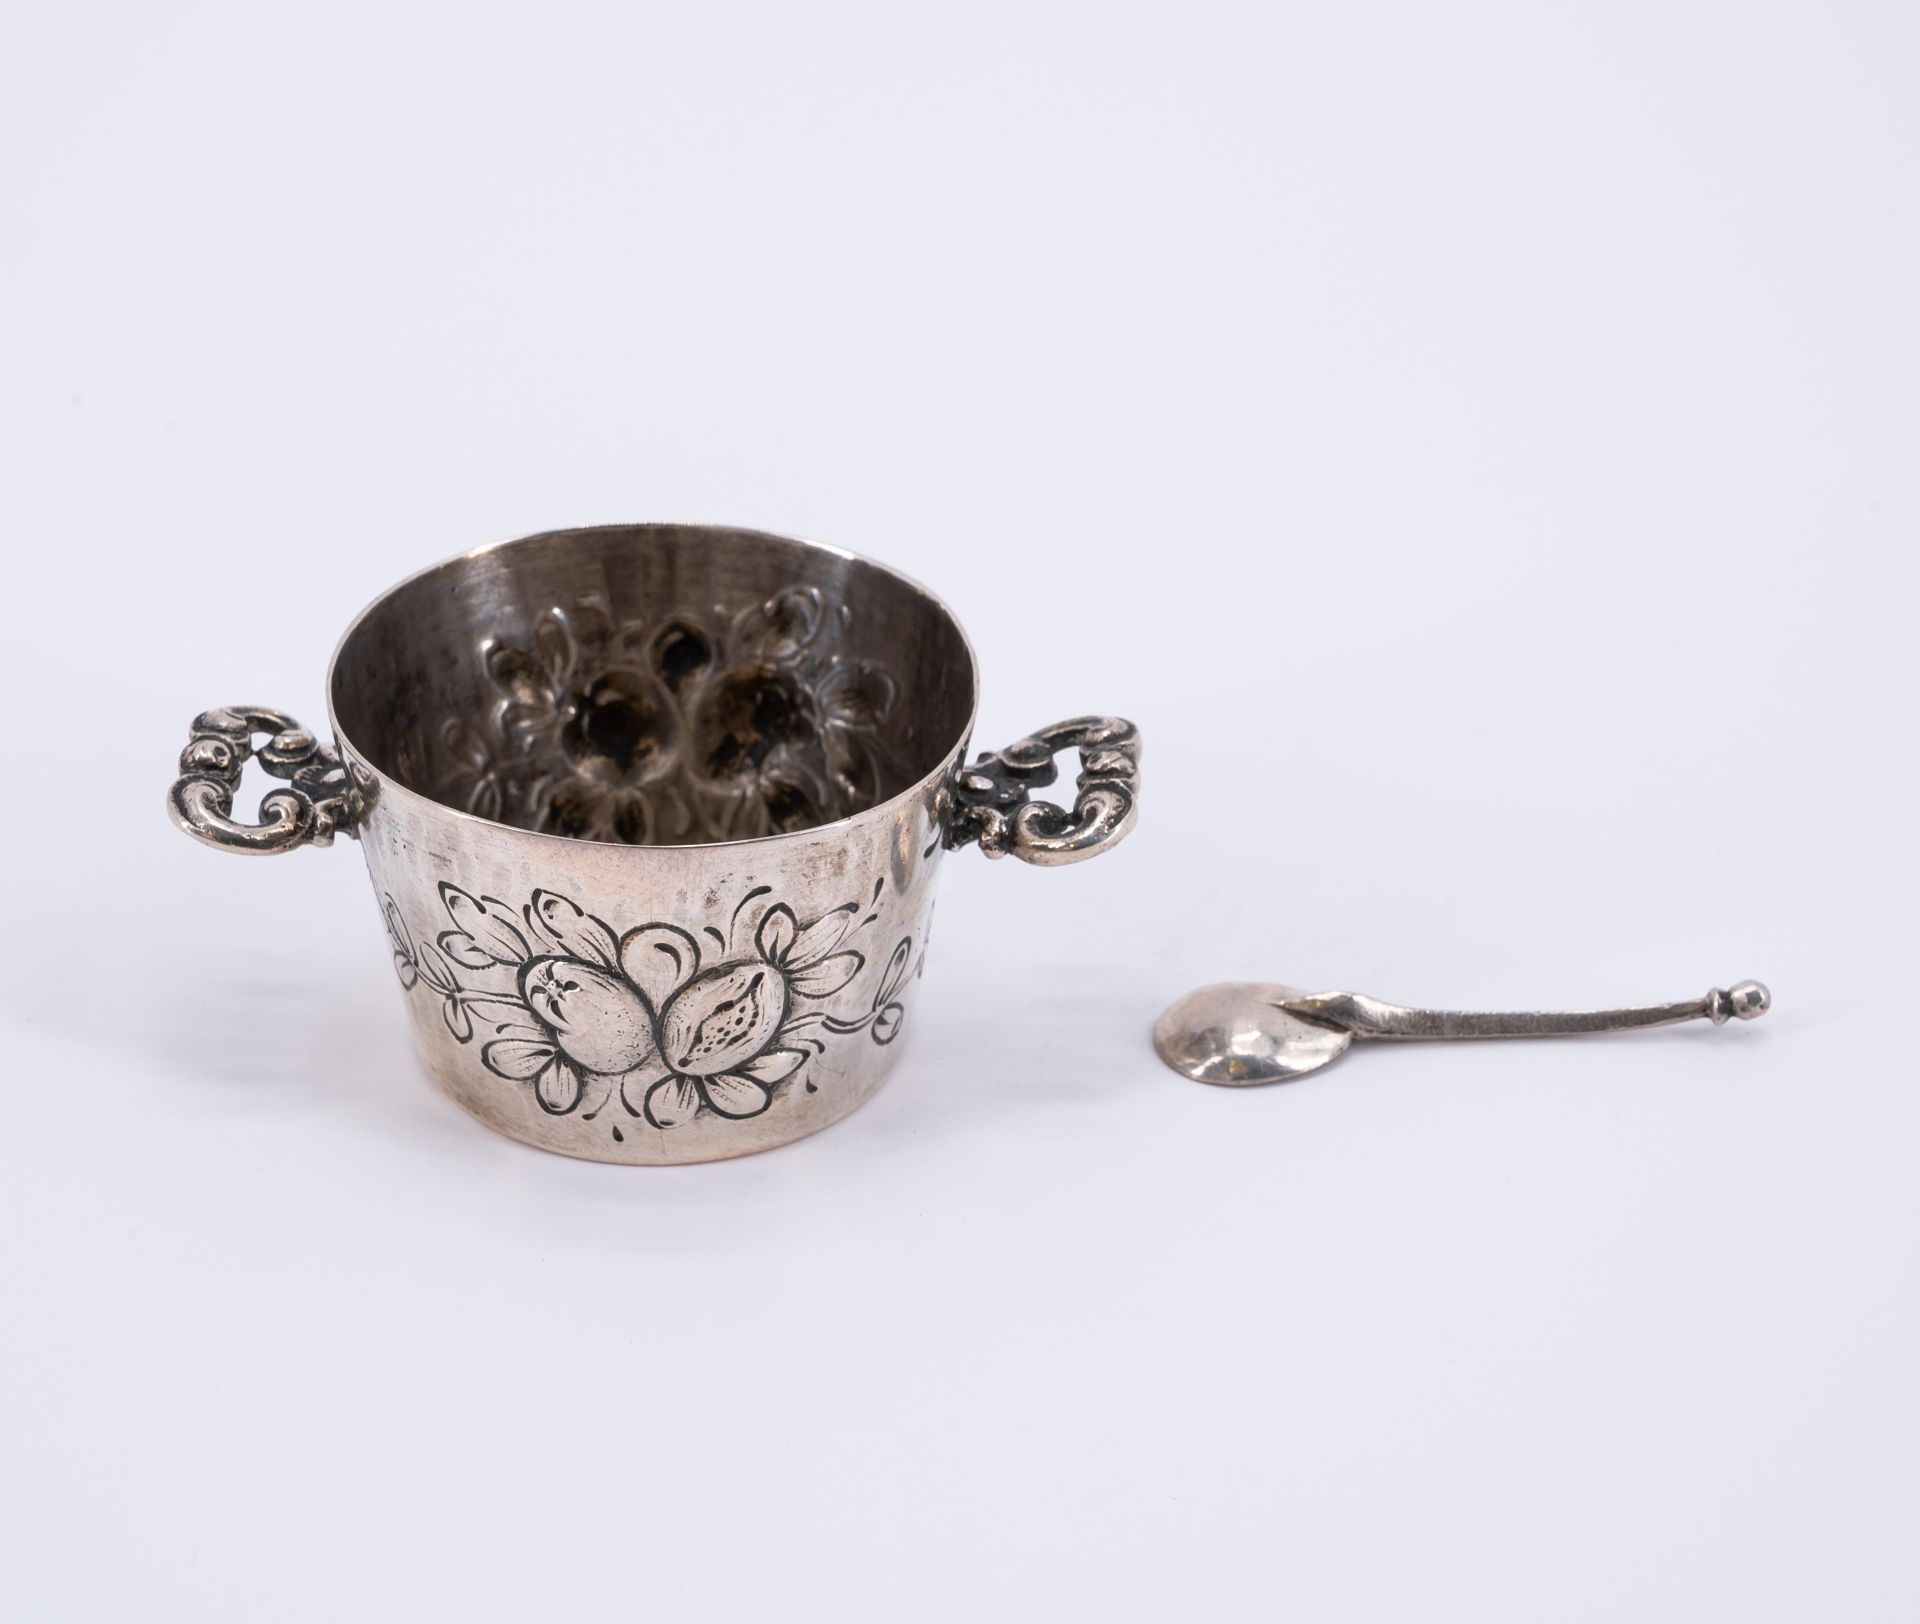 Germany: ENSEMBLE OF SIX SILVER MINIATURE OBJECTS - Image 8 of 8